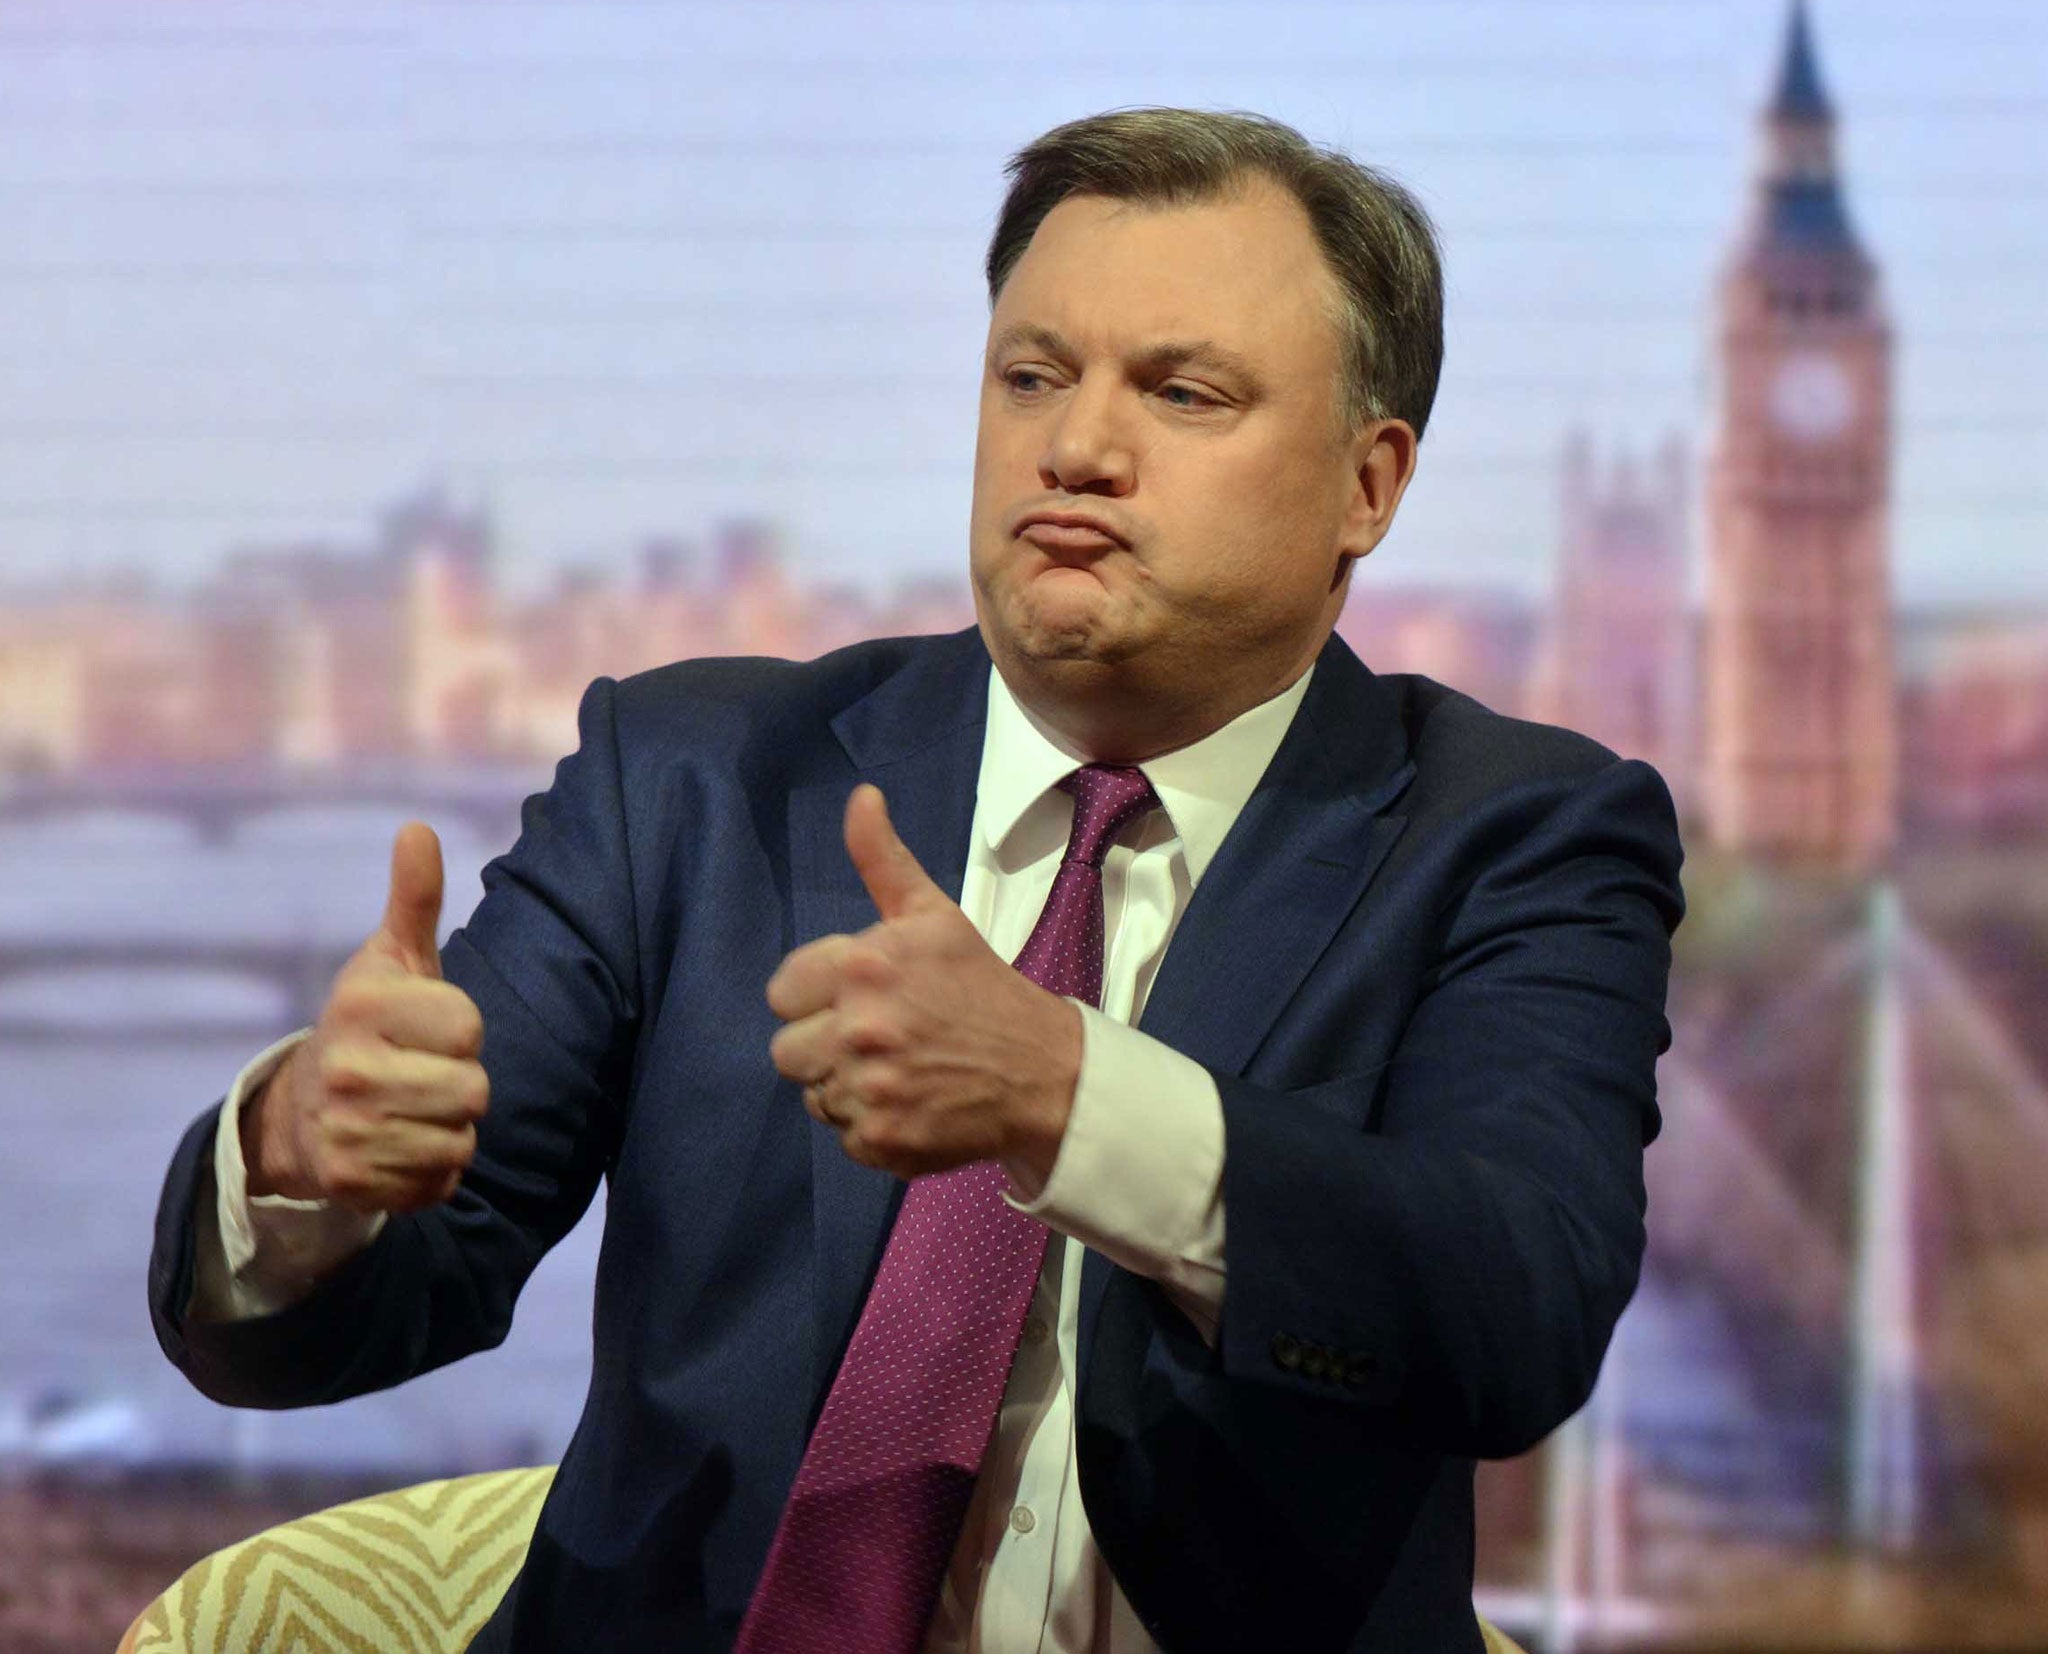 Thumbs up? All eyes will be on Ed Balls' hands this afternoon